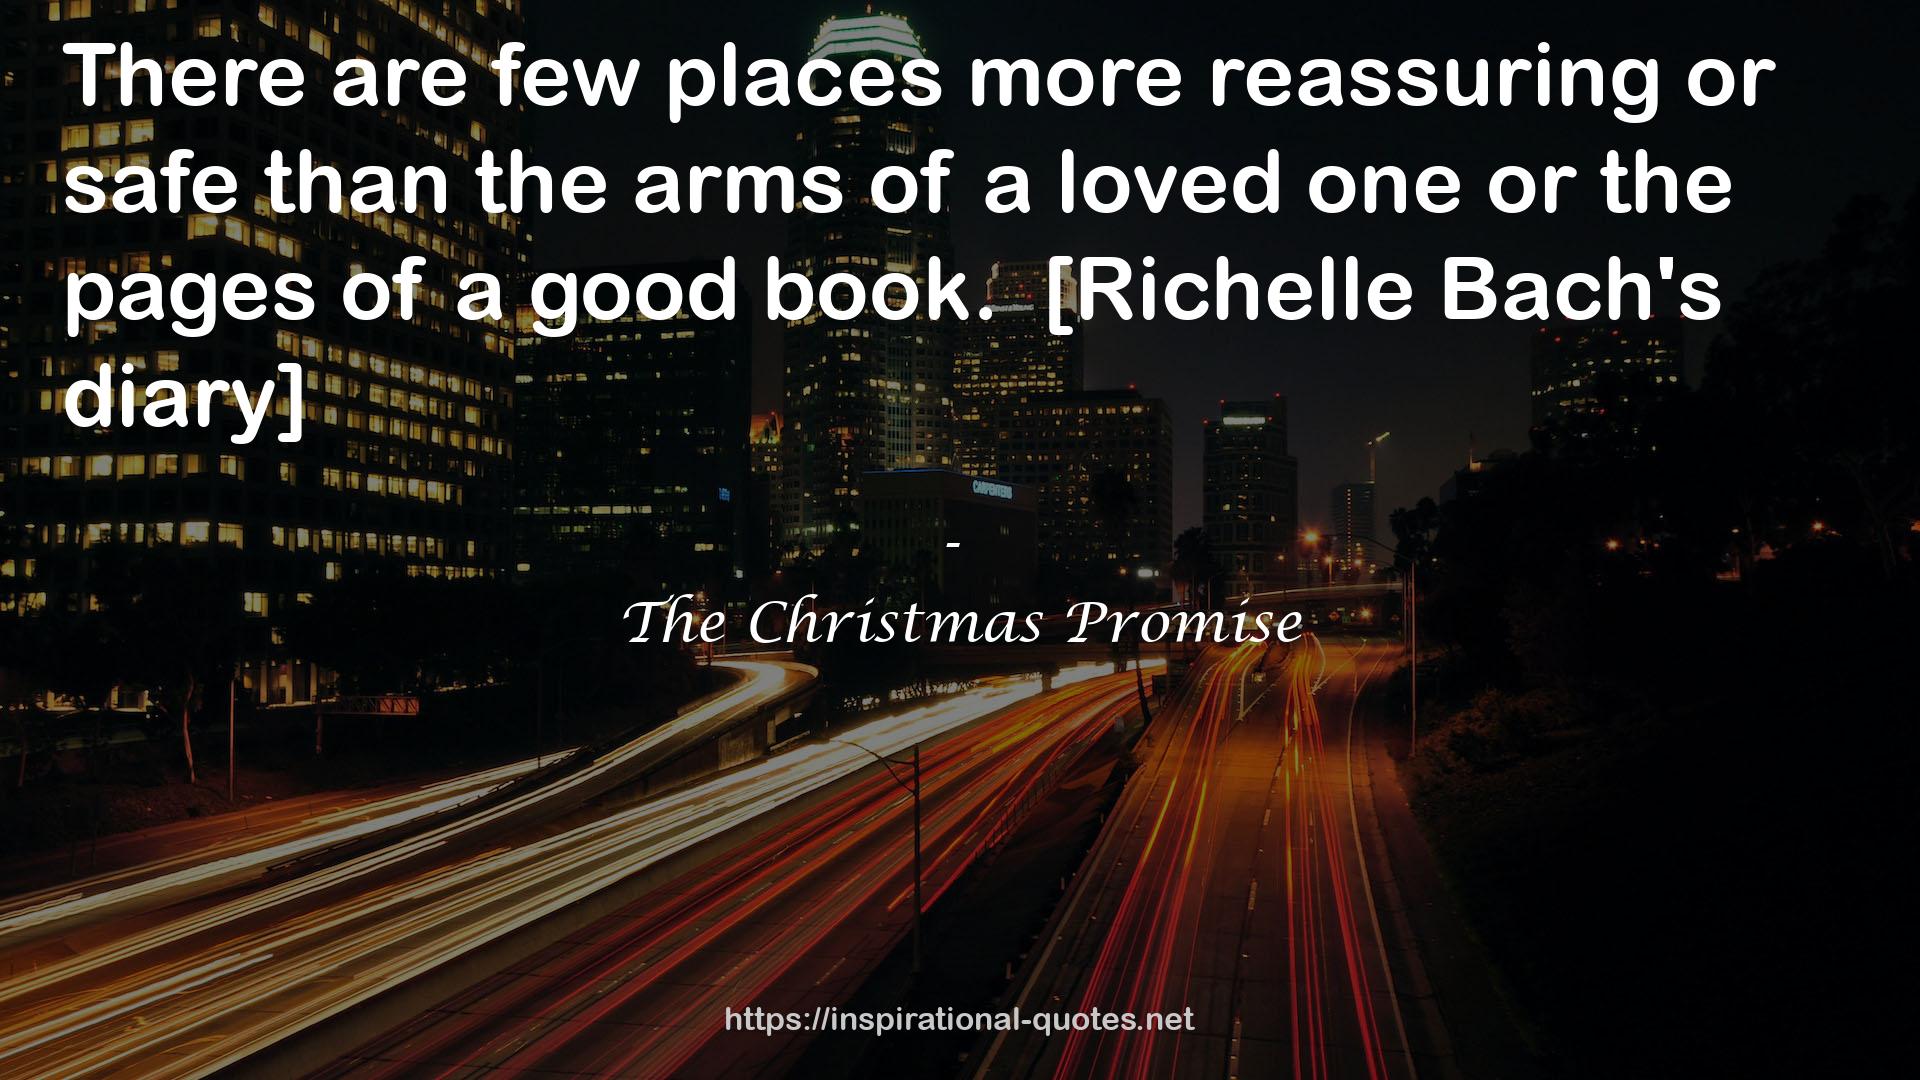 The Christmas Promise QUOTES